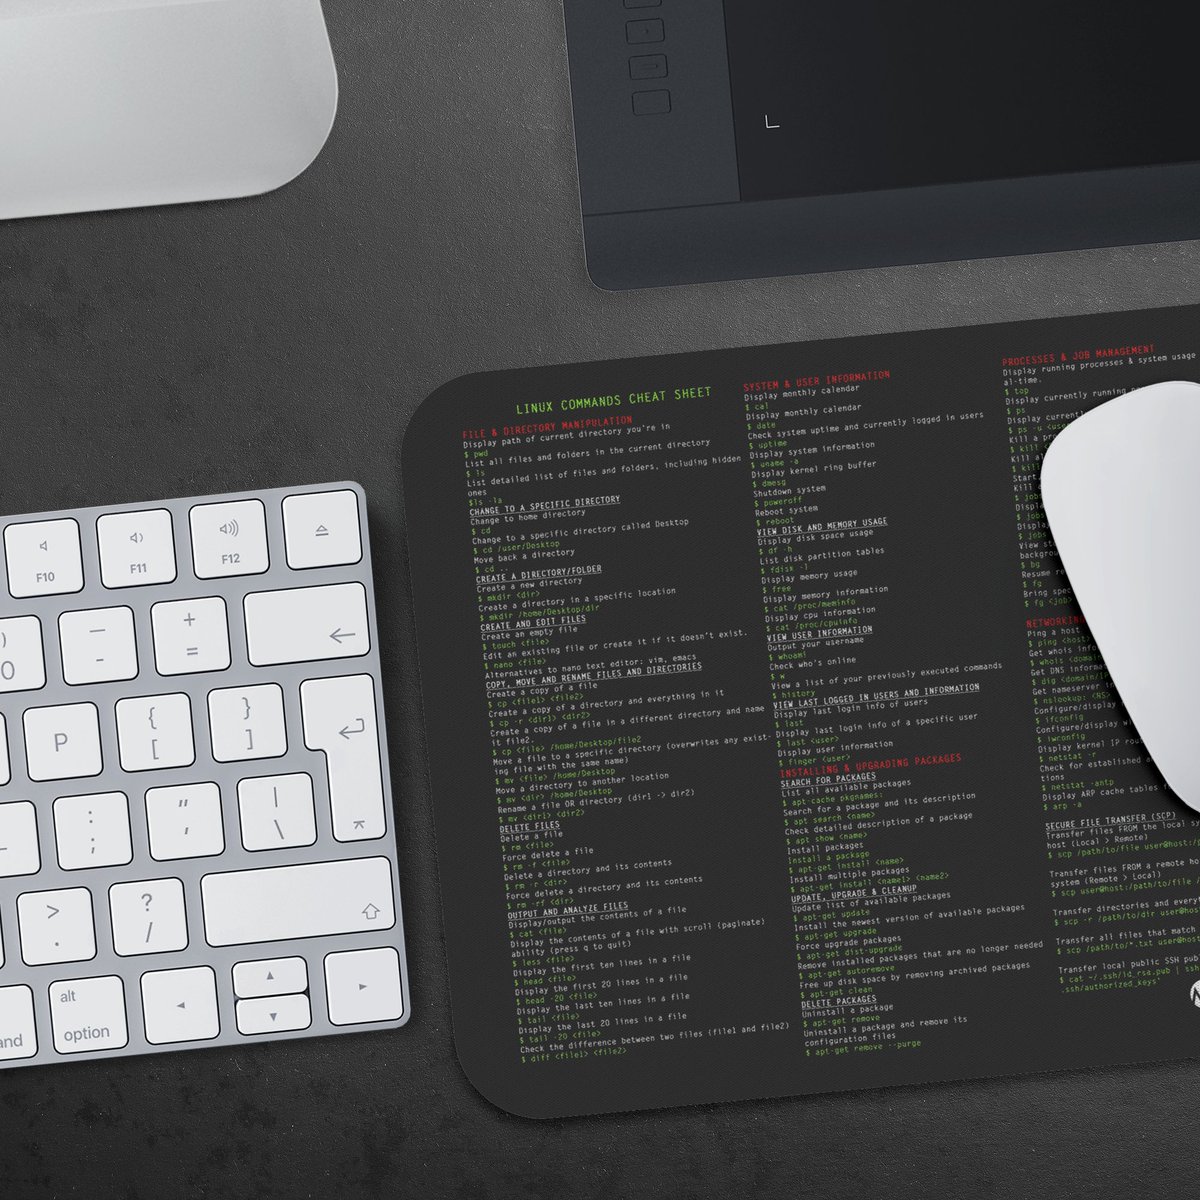 Mouse pad  - Linux Commands Cheat Sheet #myhackertech  

myhackertech.com/products/mouse…

#mousepad #mouse #mousepadgaming #mousepadmurah #gaming #mousepadcustom #mousepadgamer #mousegaming #mousepads #custommousepad #mousepadanime #mousepadpromosi #mousewireless #keyboard